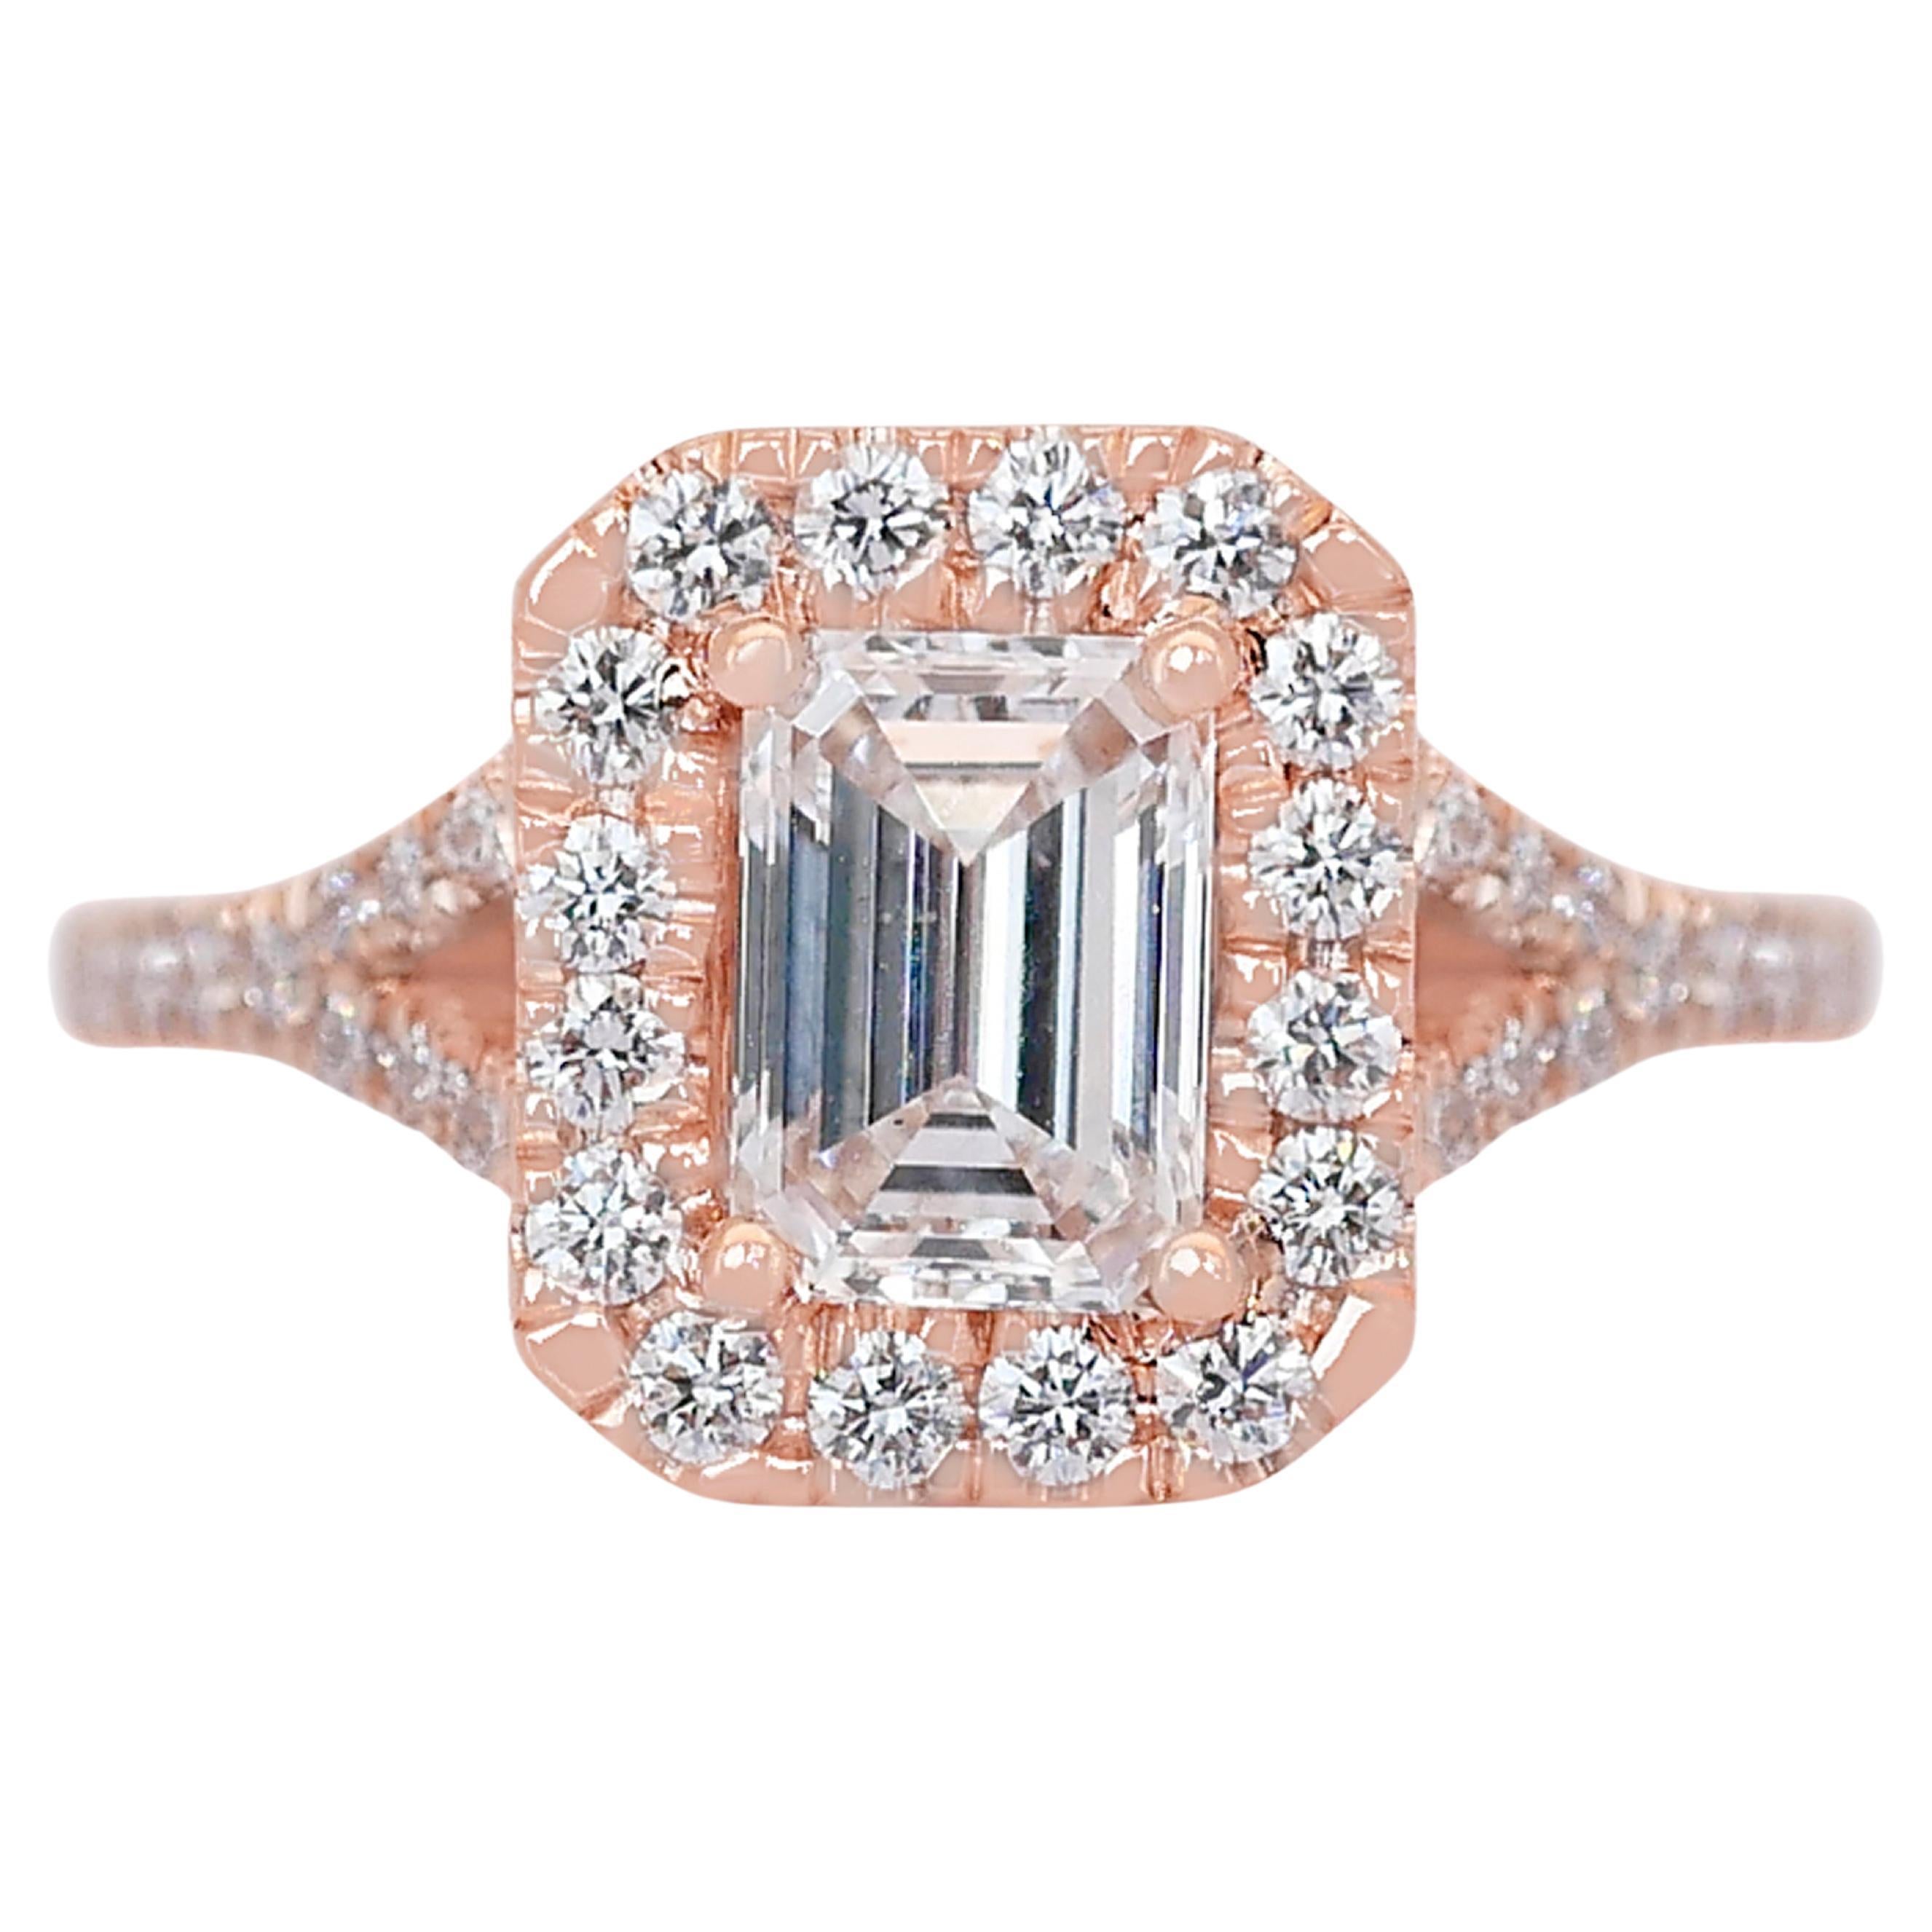 Magnificent 1.33ct Diamonds Halo Ring in 18k Rose Gold - GIA Certified